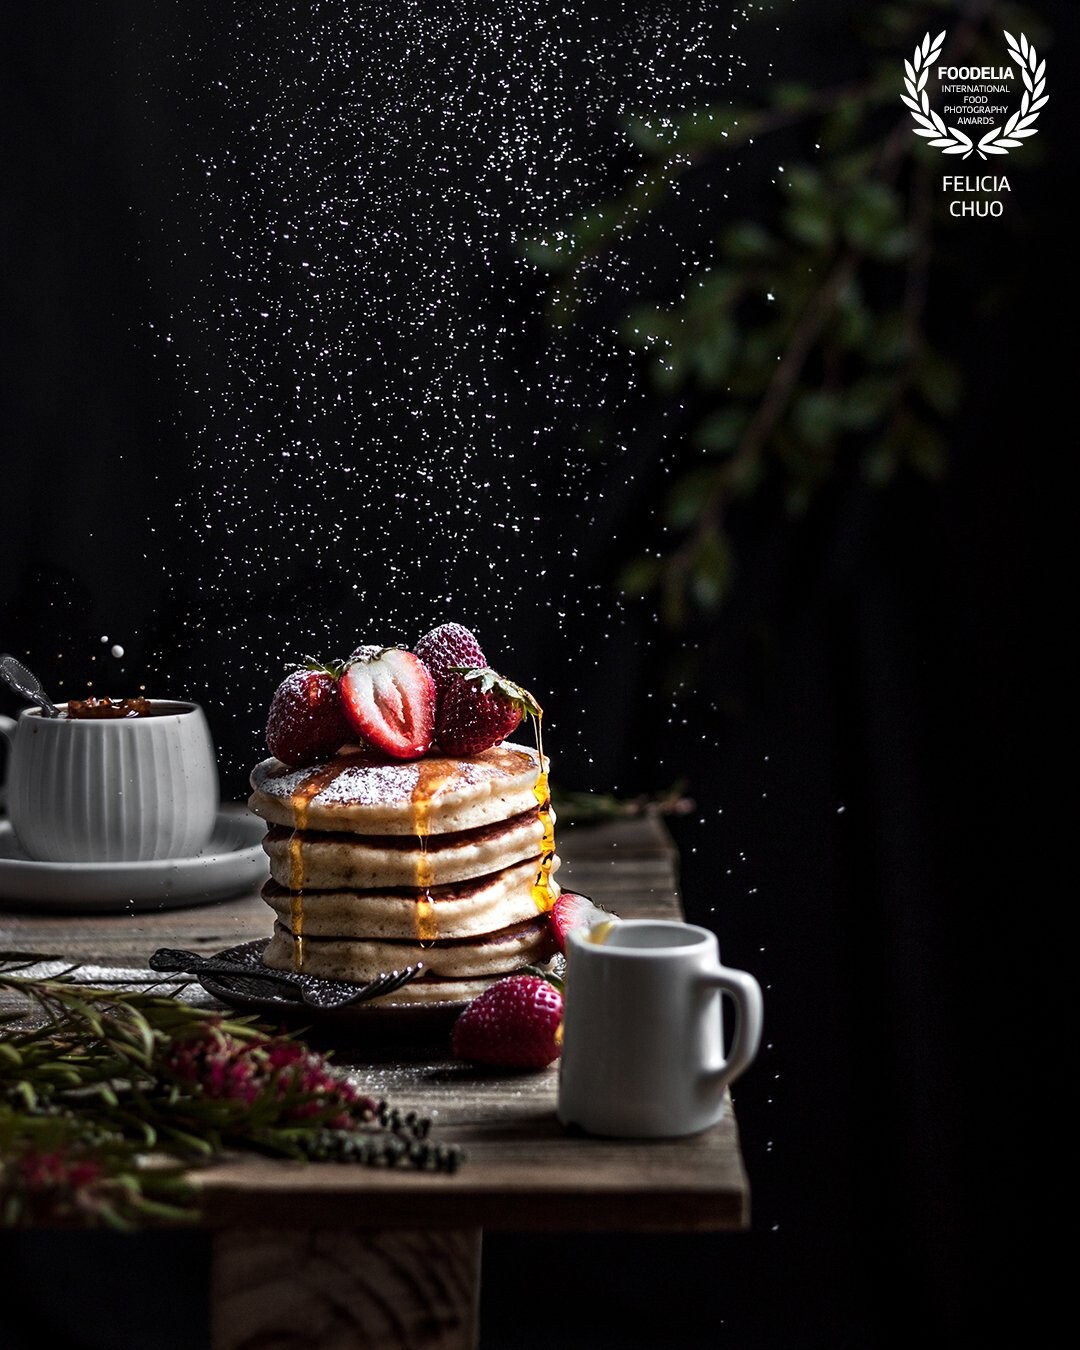 This shot is a composite of 6 shots and was shot with a speedlight. I wanted the pancake stack to have an almost magical glow to it, which I emphasised through editing. I thought it'd match all the magic-like movement in the image.